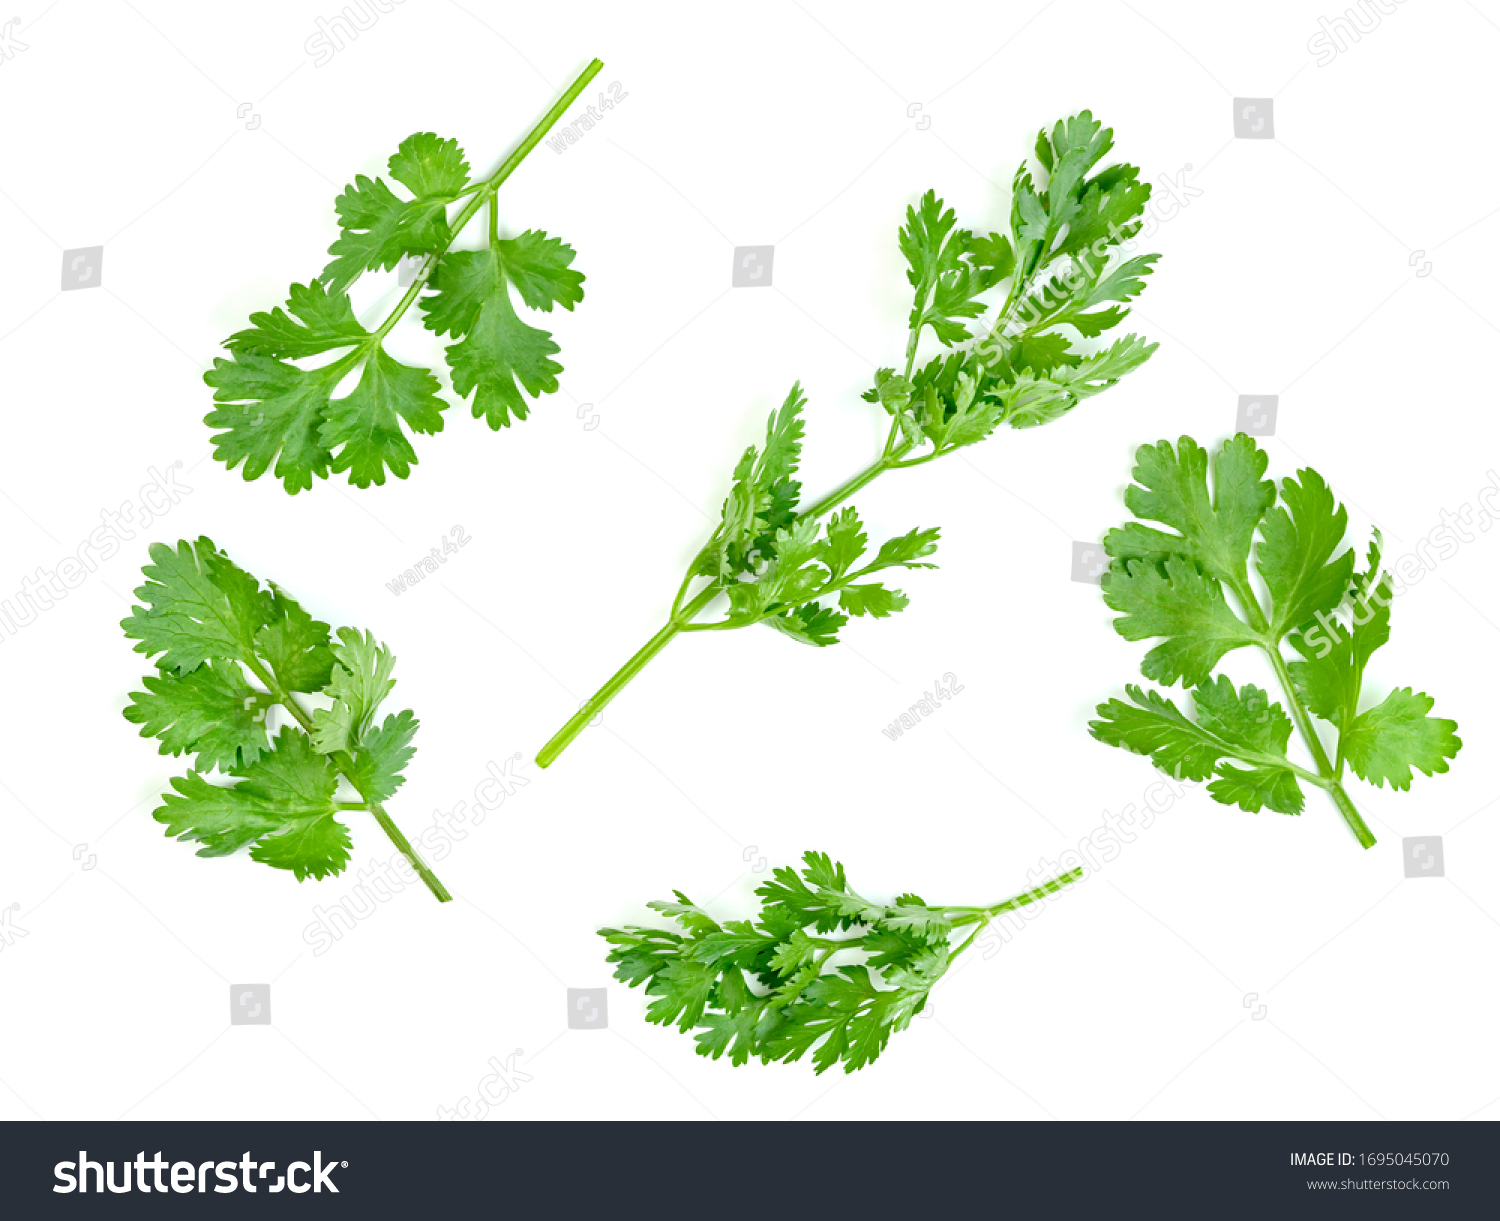 leaf Coriander or Cilantro isolated on white background. Green leaves pattern   #1695045070